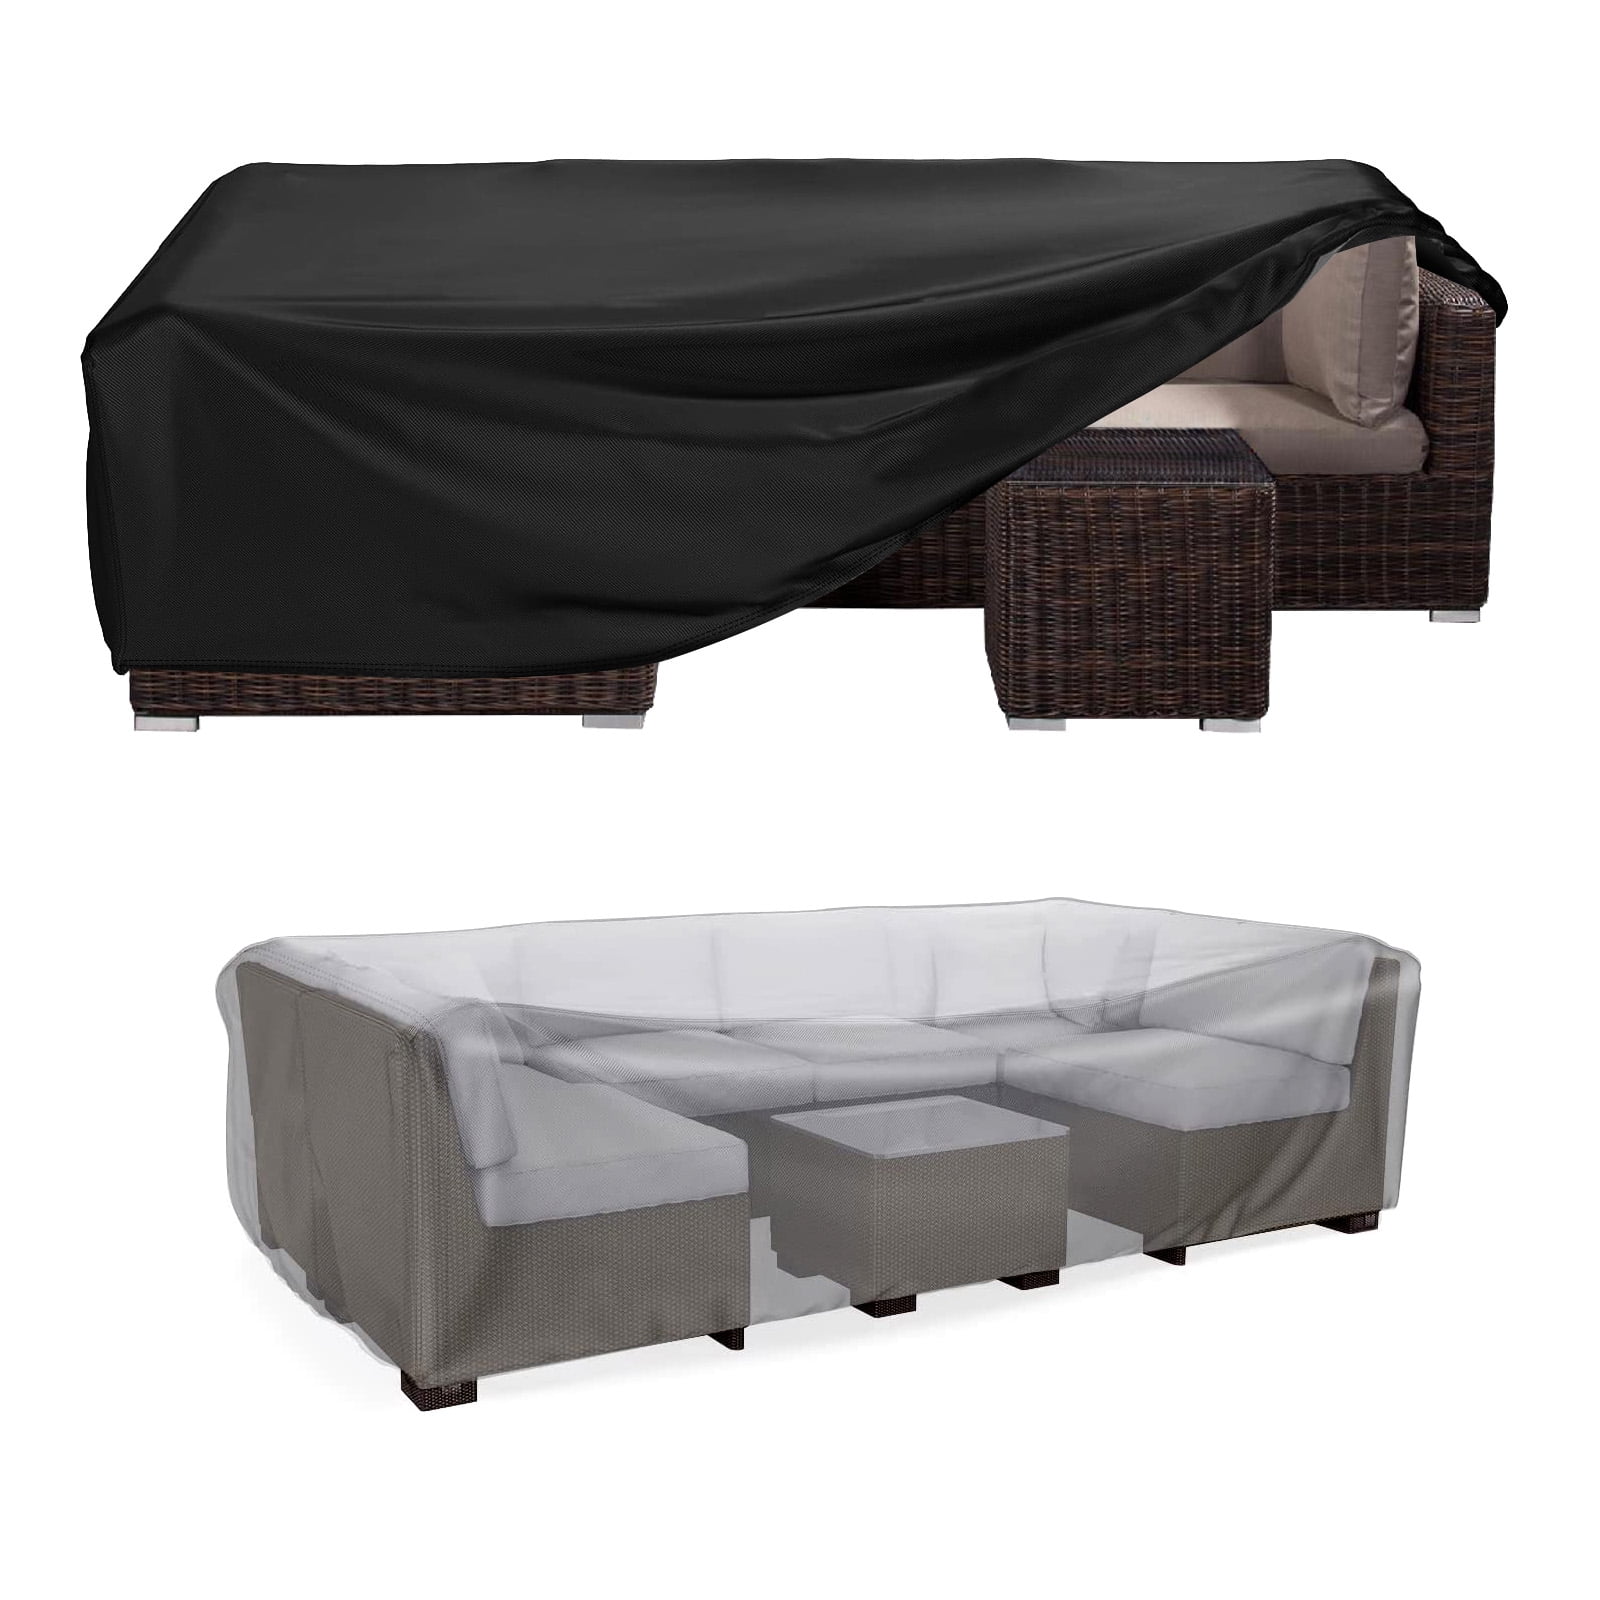 Waterproof Garden Patio Furniture Protection Covers Outdoor L Sofa Rain Cover 